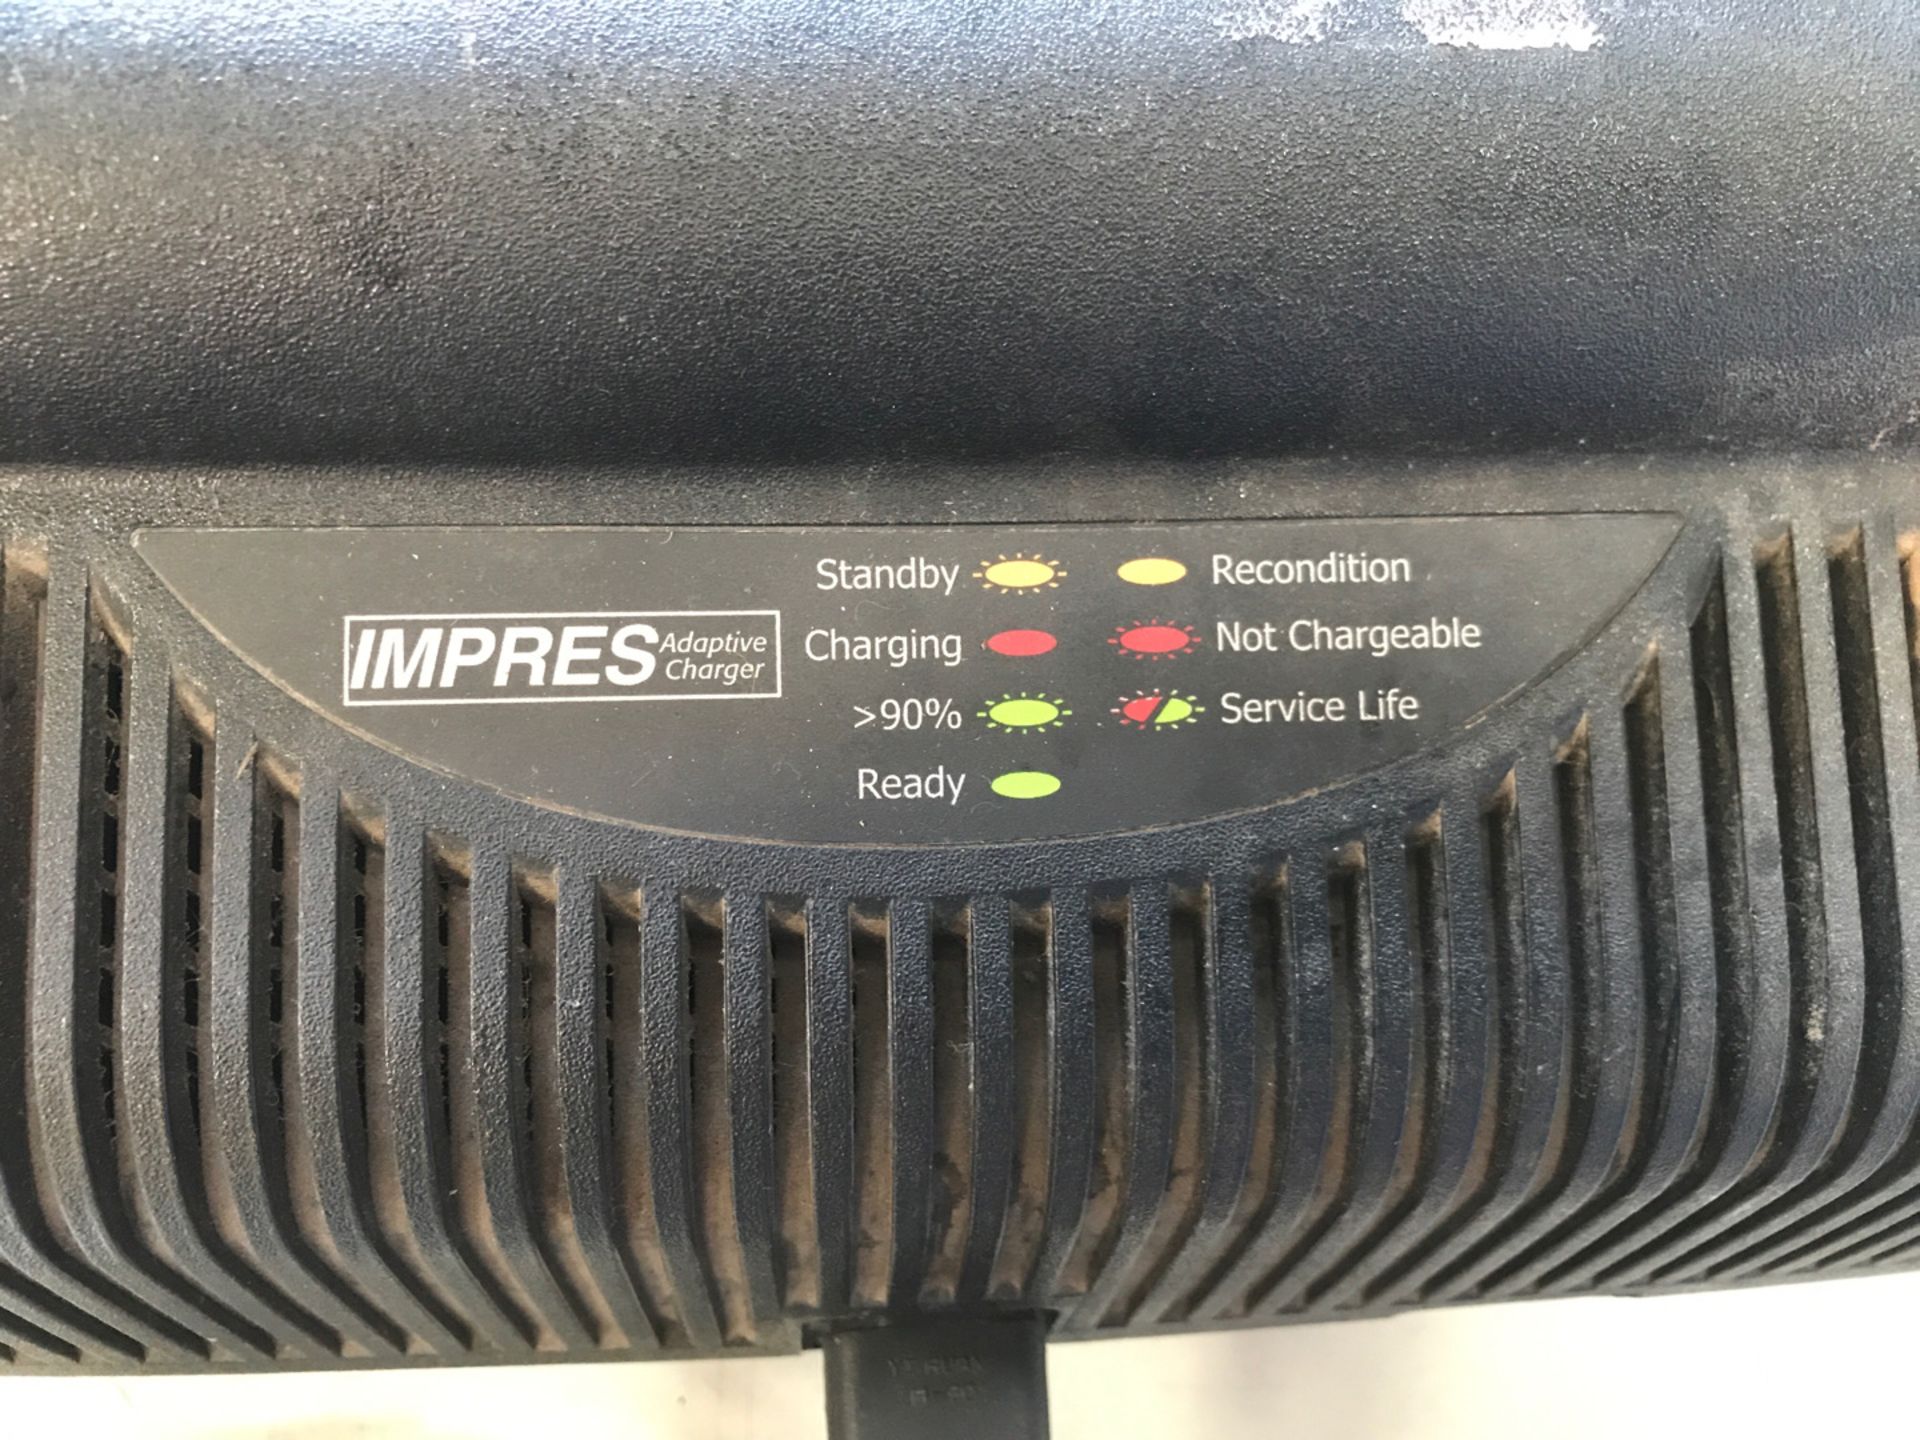 Impress adaptive charger to include for Motorola handheld radios NO RESERVE - Image 3 of 5